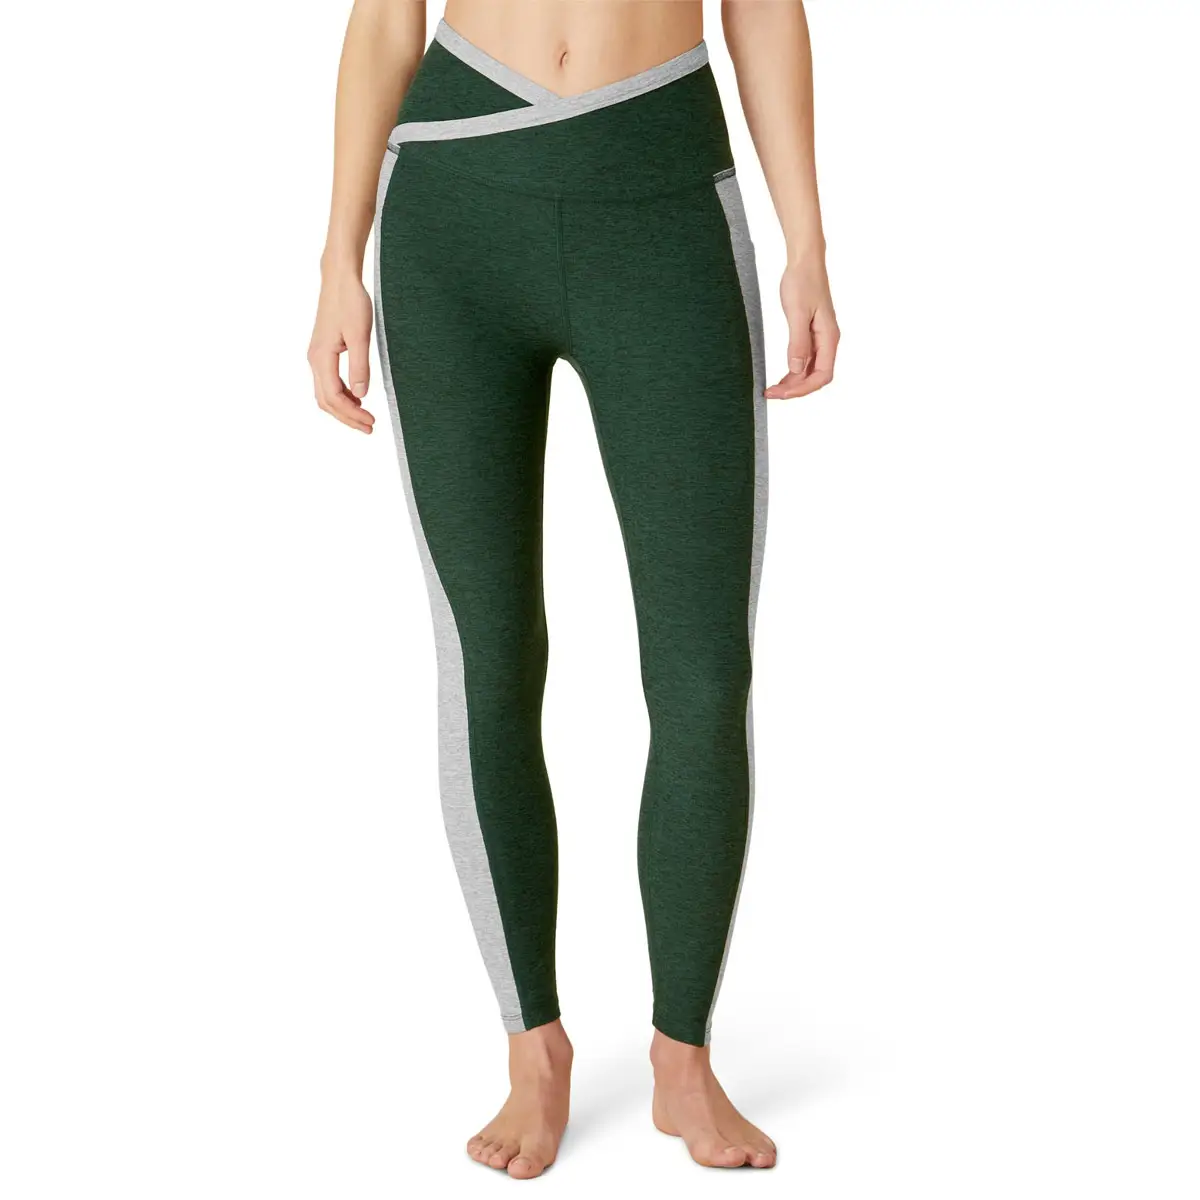 High Quality Active Workout Yoga Fitness Leggings High Waisted Leggings For Women Gym Pants Solid Color Tights Women's Leggings